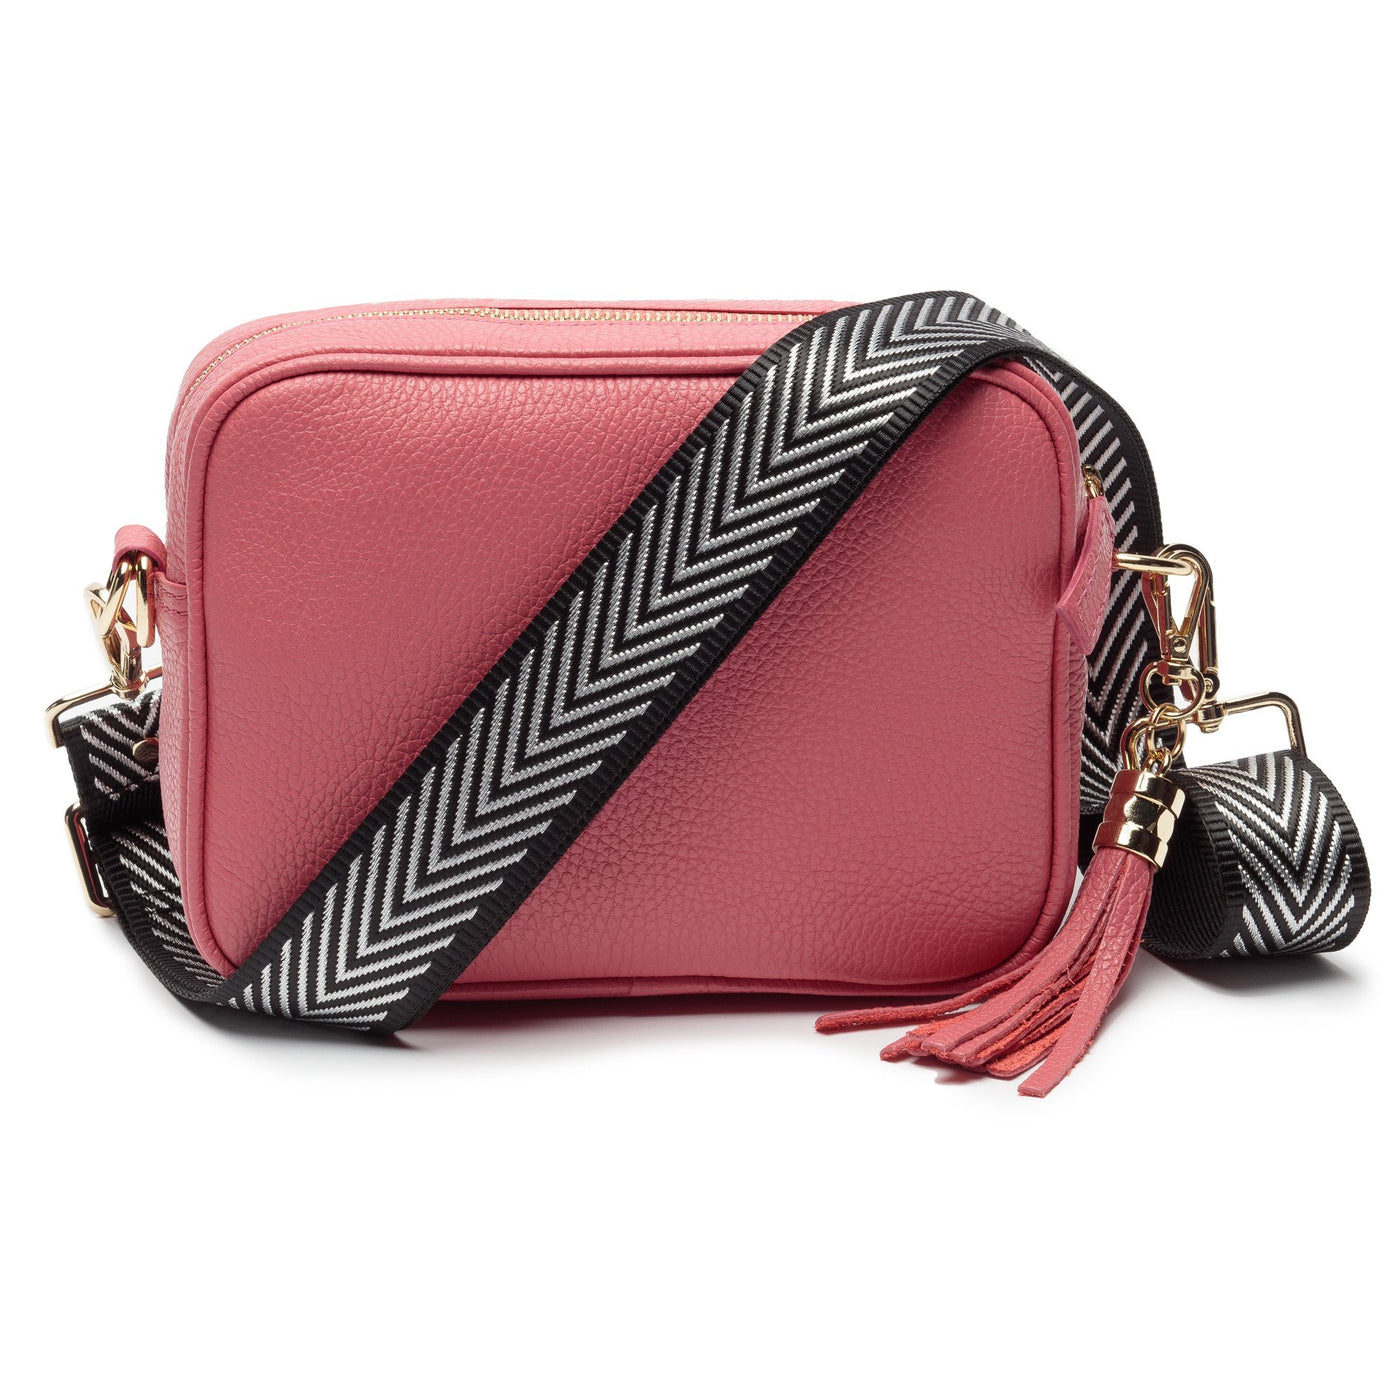 Elie Beaumont Designer Leather Crossbody Bag - Strawberry Pink (GOLD Fittings)